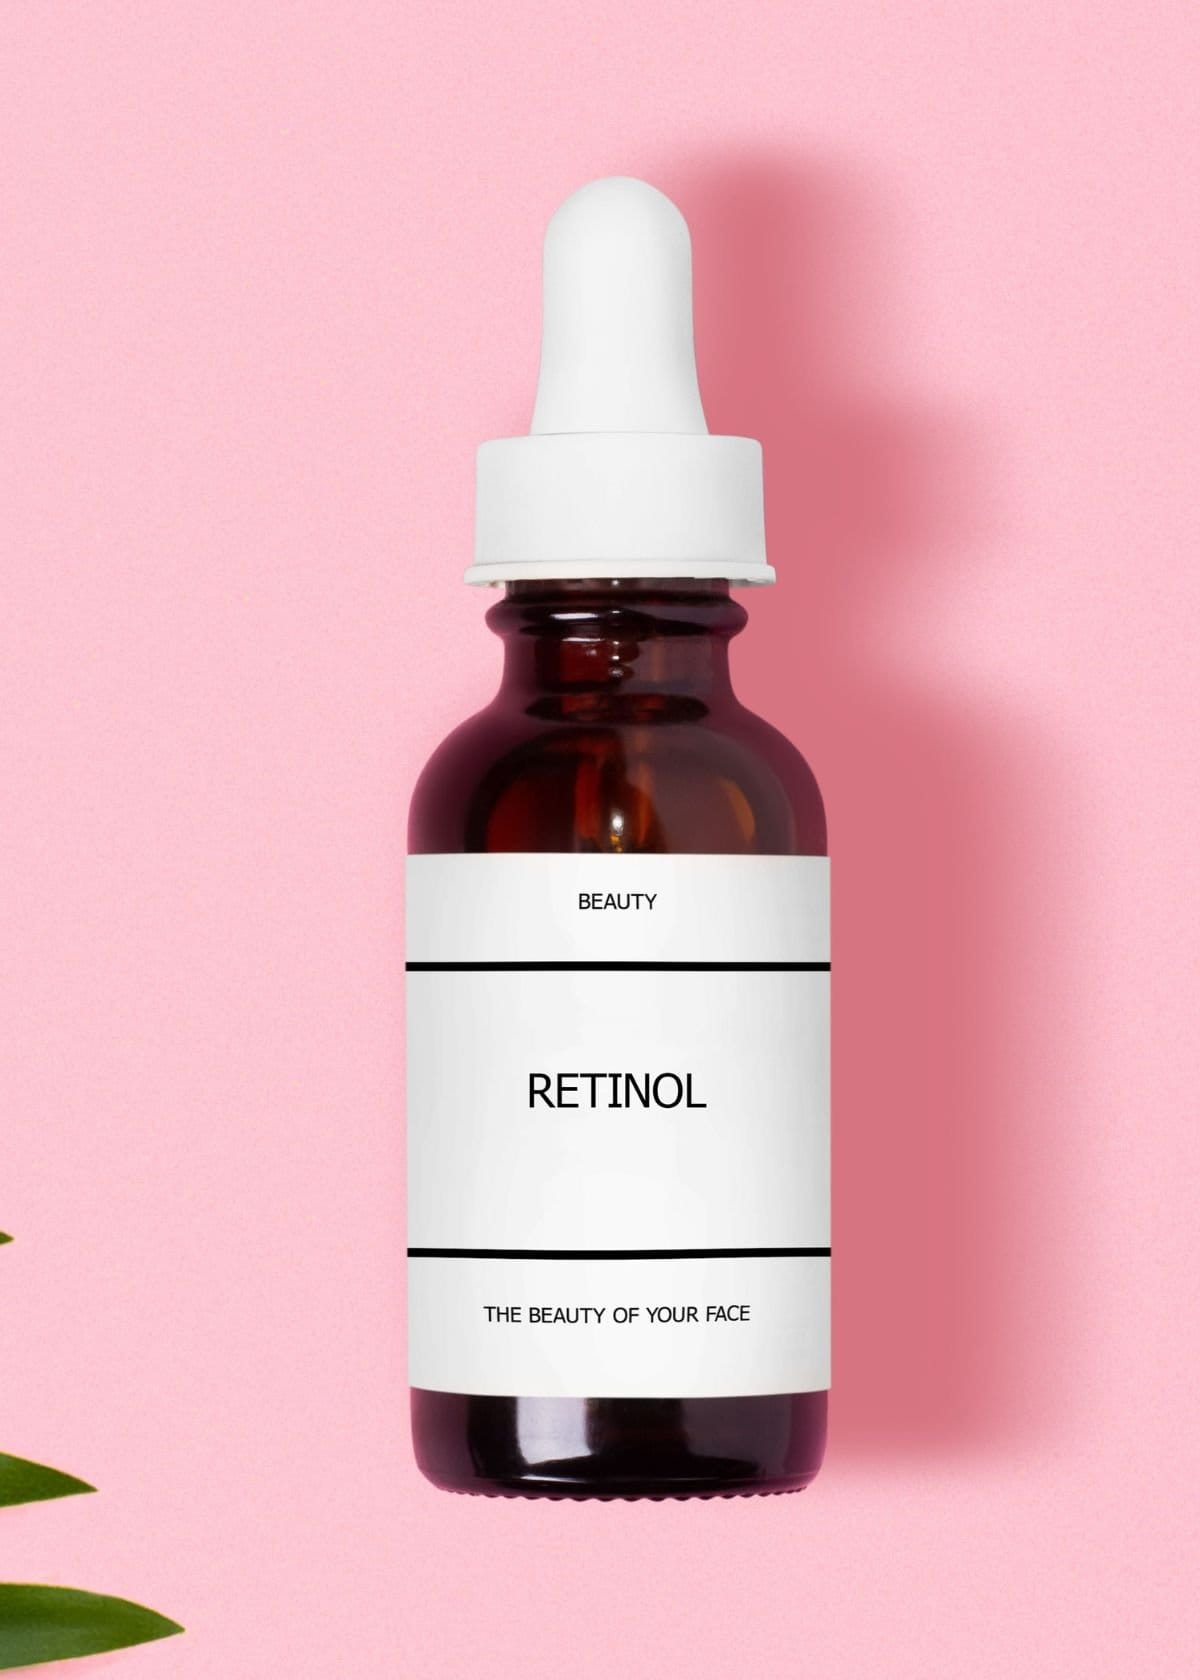 Can You Use Toner with Retinol? Know The Risks